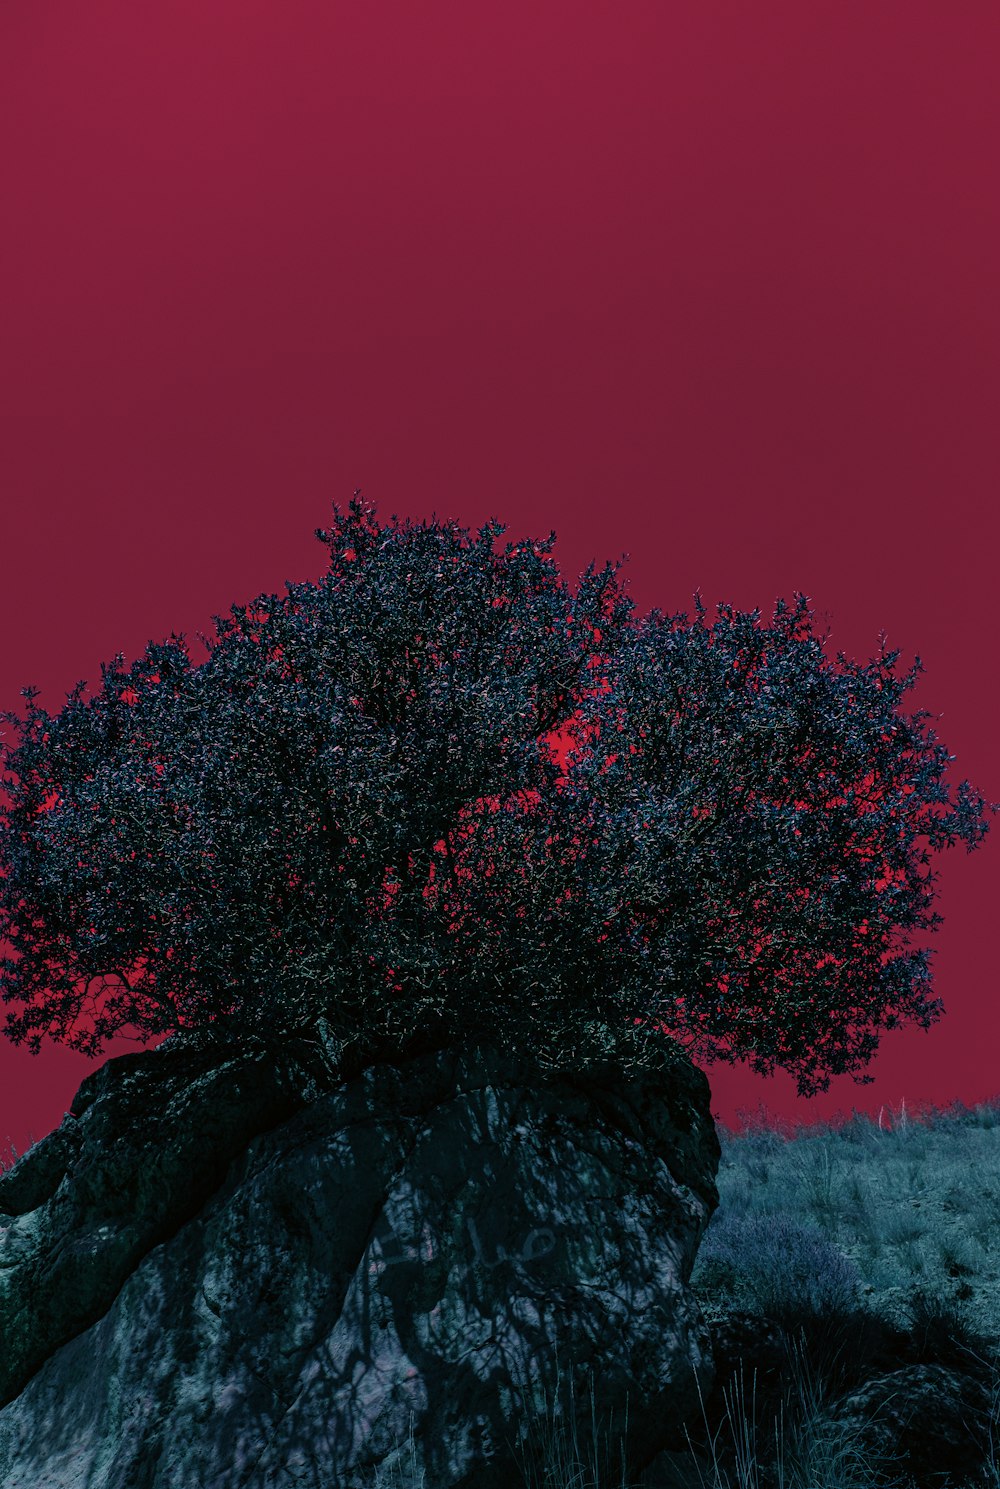 a lone tree on a rocky outcropping under a red sky